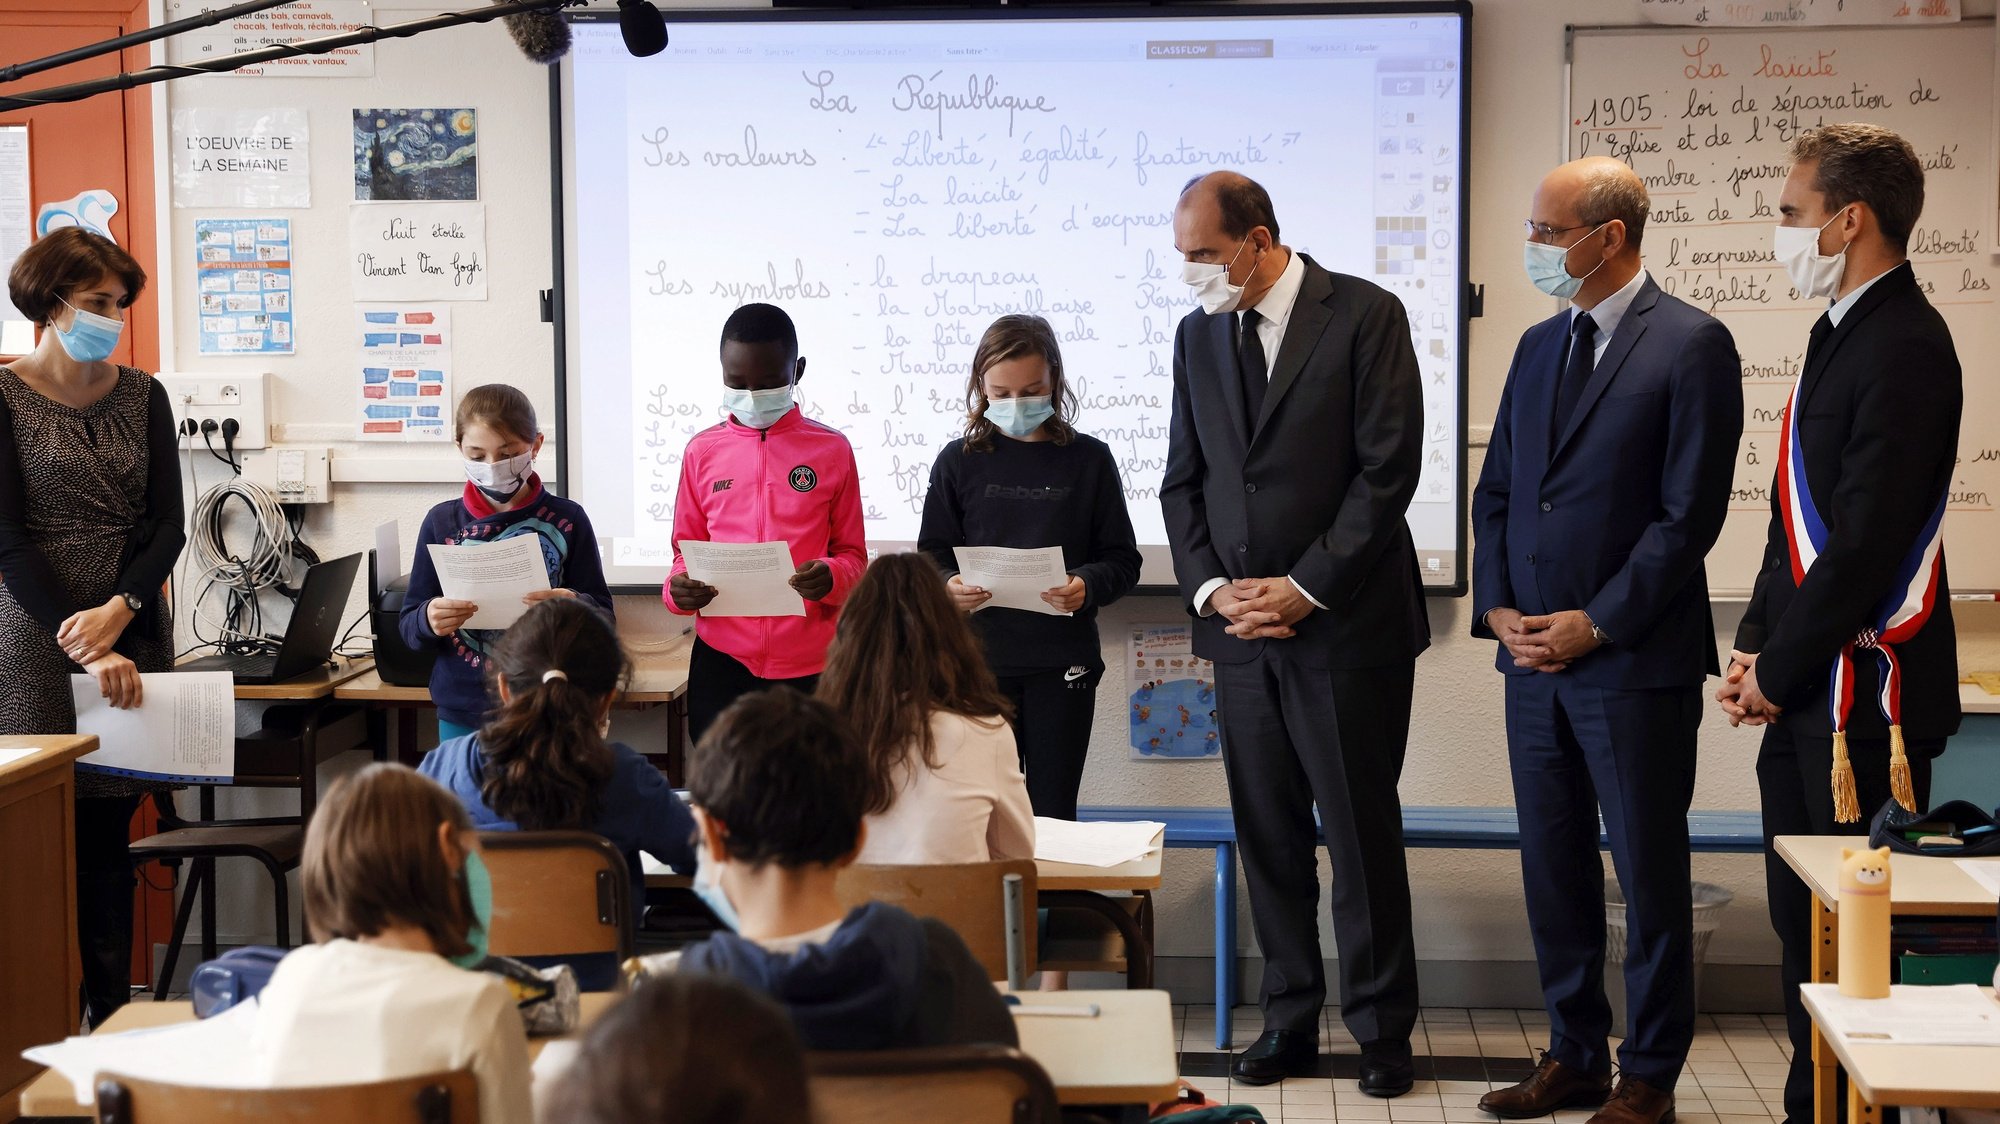 epa08792608 French Prime Minister Jean Castex (C) and French Education, Youth and Sports Minister Jean-Michel Blanquer (2-R) attend a homage to slained French history teacher Samuel Paty, at a school in Conflans-Sainte-Honorine, France, 02 November 2020. Schoolchildren across France were to observe a minute of silence at 11:00 am, as students returned to classes after the autumn break, to remember Samuel Paty, who was killed in Conflans-Sainte-Honorine, outside Paris, on October 16 just as the holiday began. Paty had shown his class a cartoon of the prophet Mohammed for a lesson on freedom of expression, spurring an online campaign targeting him.  EPA/THOMAS COEX / POOL MAXPPP OUT